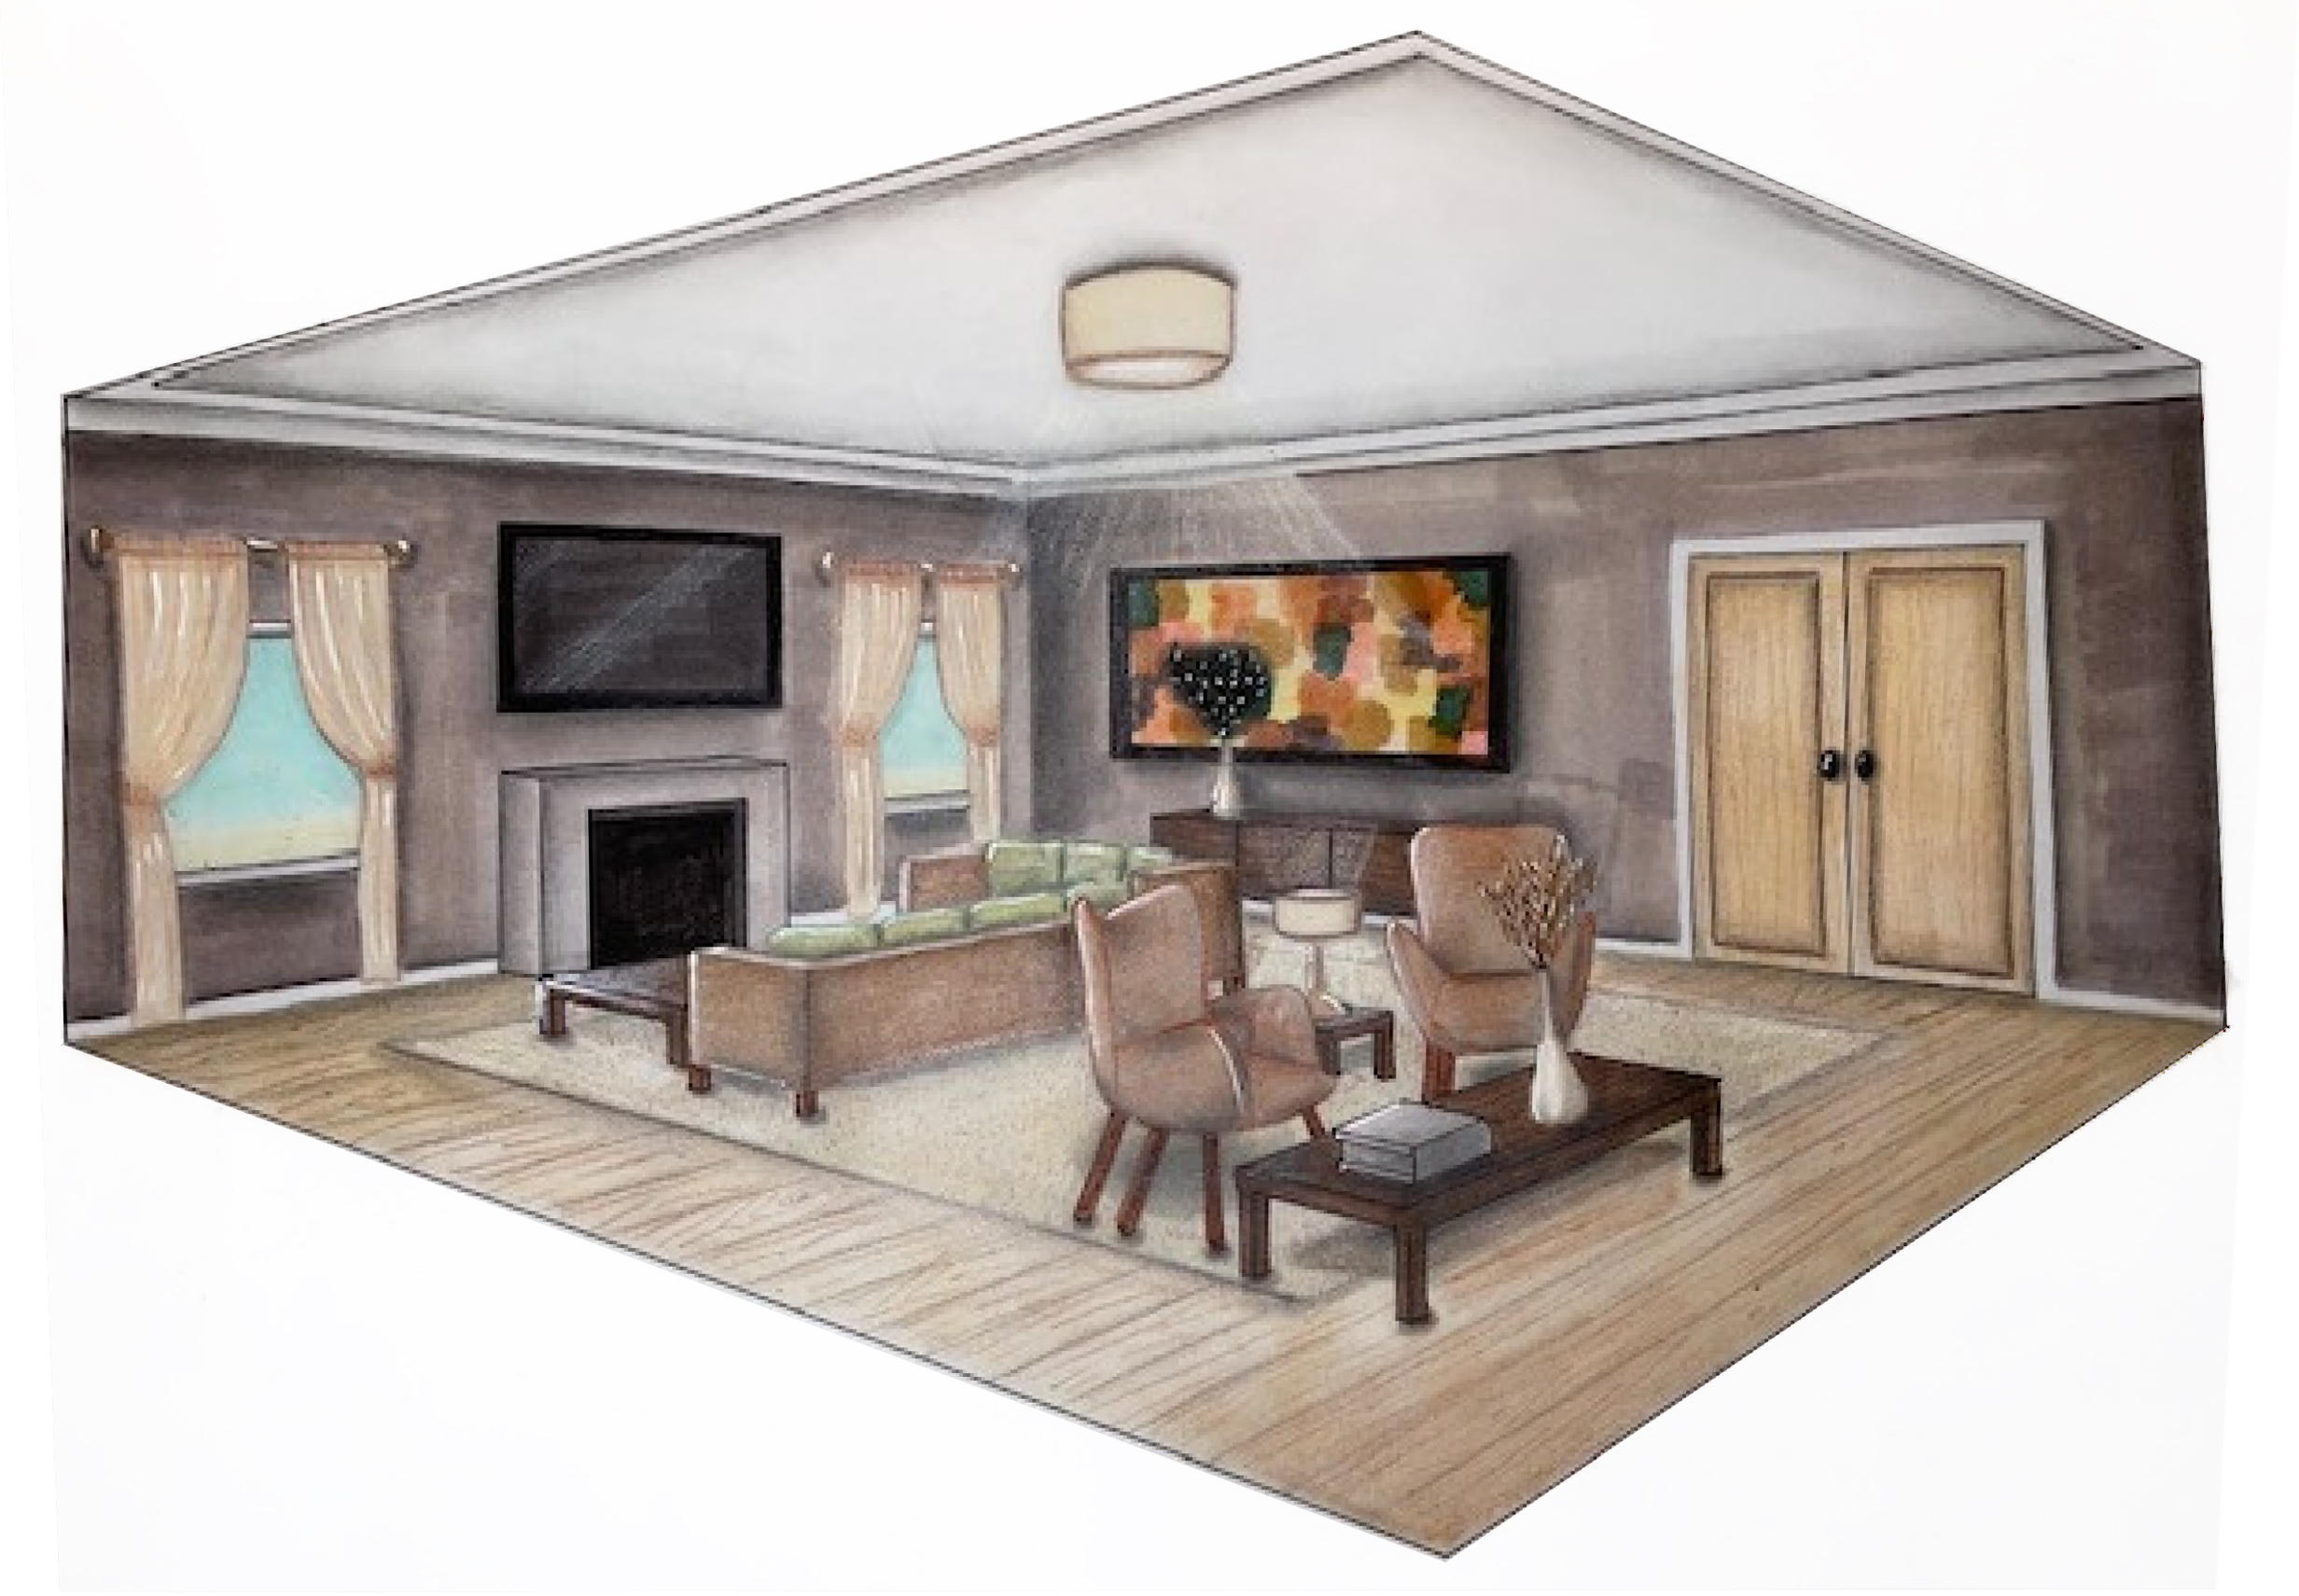 Hand-drawn sketch of a living room